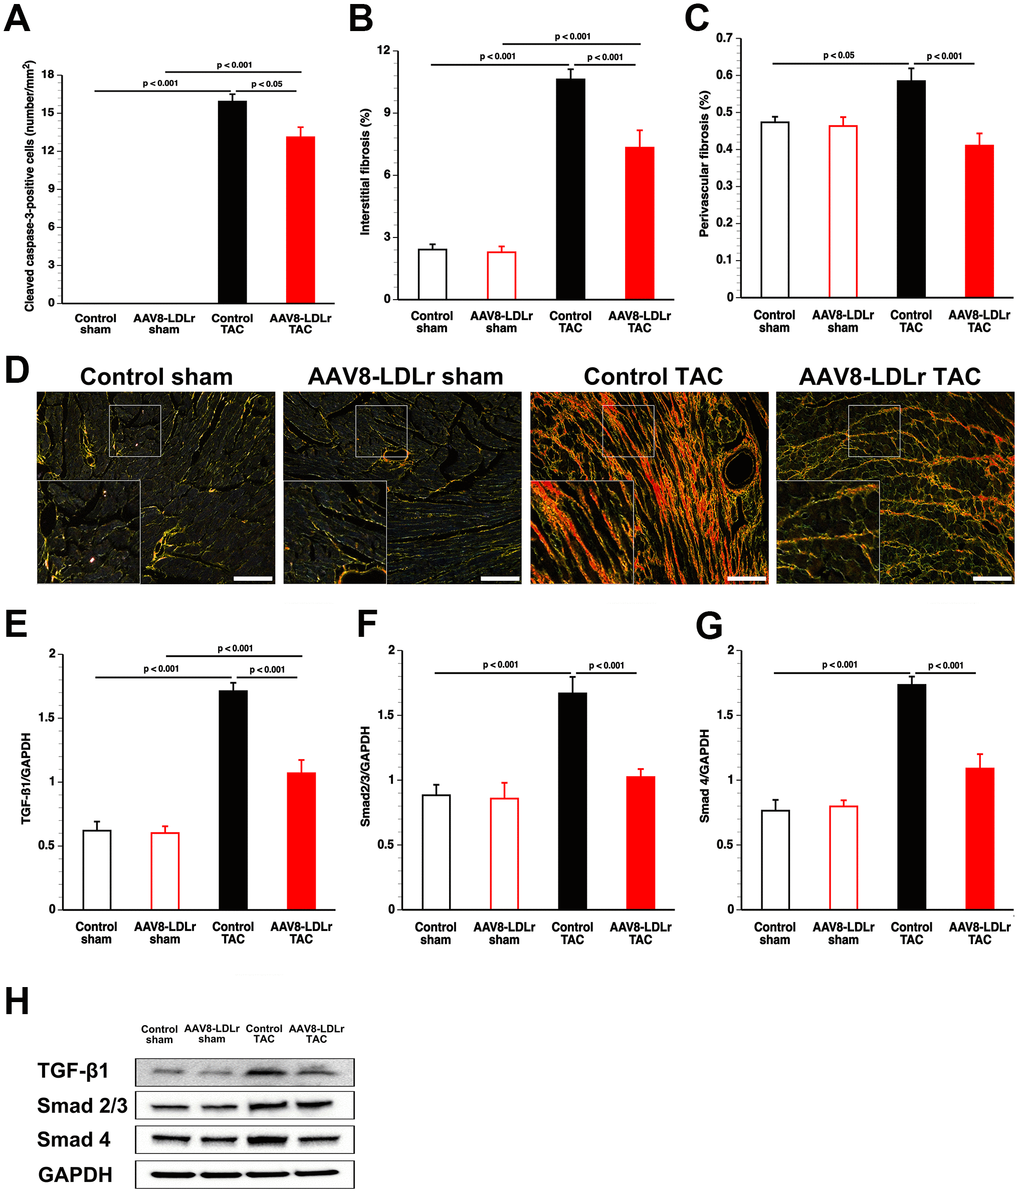 AAV8-LDLr gene transfer significantly reduces interstitial fibrosis, perivascular fibrosis, and apoptosis after TAC. Bar graphs illustrating the number of cleaved caspase-3 positive cells (A), the degree of interstitial fibrosis (B), and the degree of perivascular fibrosis (C) in control sham (n=14), AAV8-LDLr sham (n=11), control TAC (n=25), and AAV8-LDLr TAC (n=11) 8 weeks after operation. Representative photomicrographs showing Sirius Red-stained interstitial collagen viewed under polarized light (D). Scale bar represents 50 μm. Bar graphs illustrating the 25 kD isoform of TGF-ß1 (E), Smad2/3 (F), and Smad4 (G) myocardial protein levels quantified by western blot in the myocardium of control sham (n=8), AAV8-LDLr sham (n=8), control TAC (n=8), and AAV8-LDLr TAC (n=8) mice 8 weeks after operation. All protein levels were normalized to the glyceraldehyde-3-phosphate dehydrogenase (GAPDH) protein level. Data are expressed as means ± SEM. Representative images of western blots are shown in panel h. Insets show a 4x magnification of the boxed region.